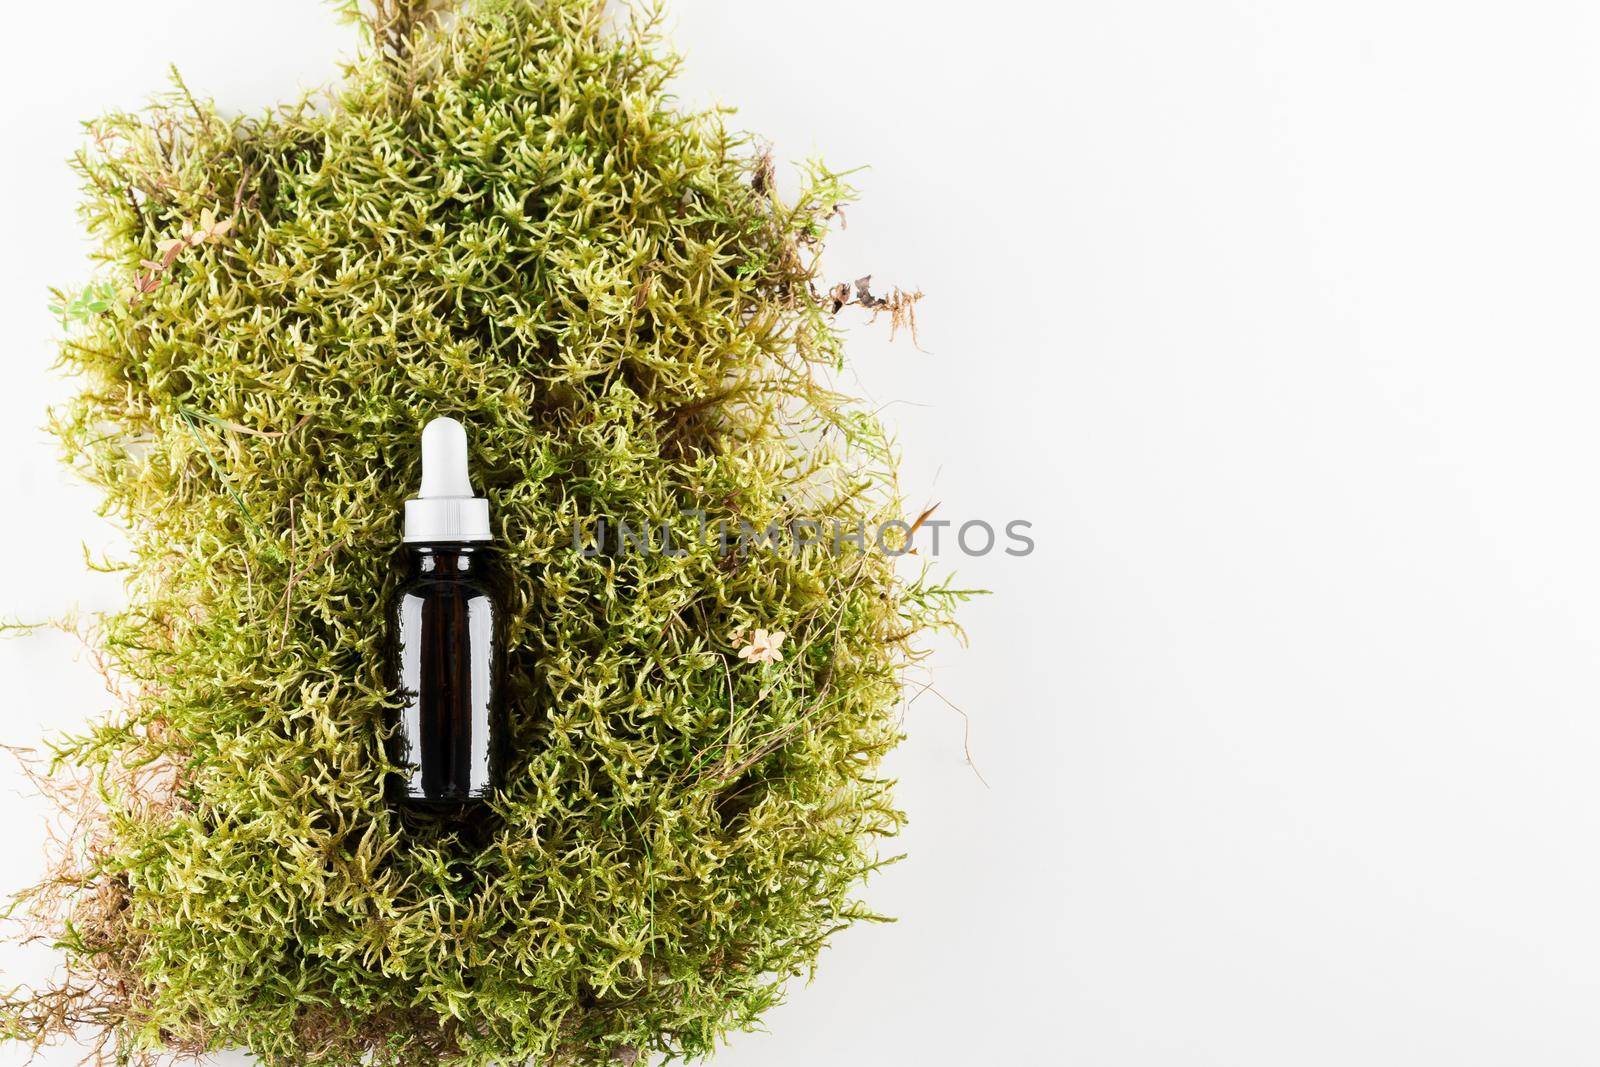 concept of ecological cosmetics without plastic in glass bottles by maramorosz